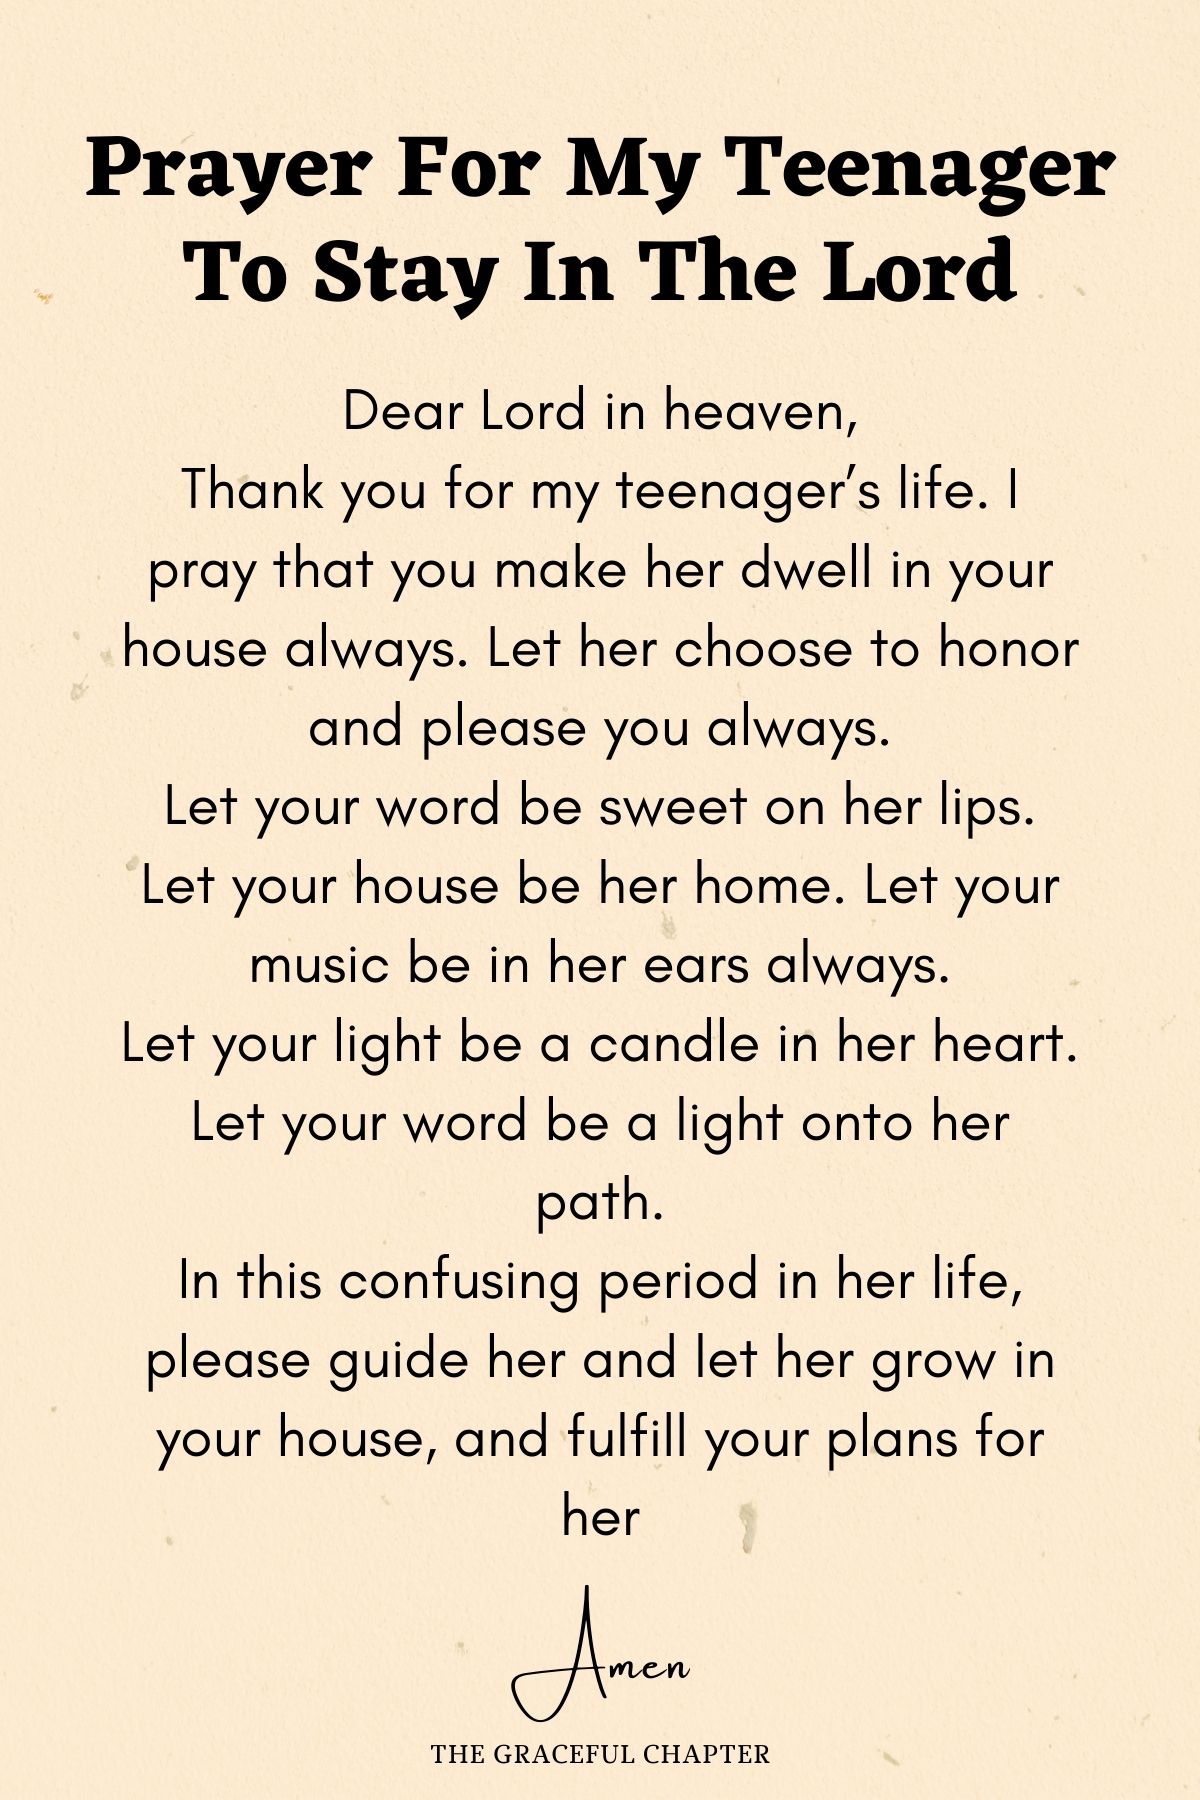 Prayer for my teenager to stay in the Lord